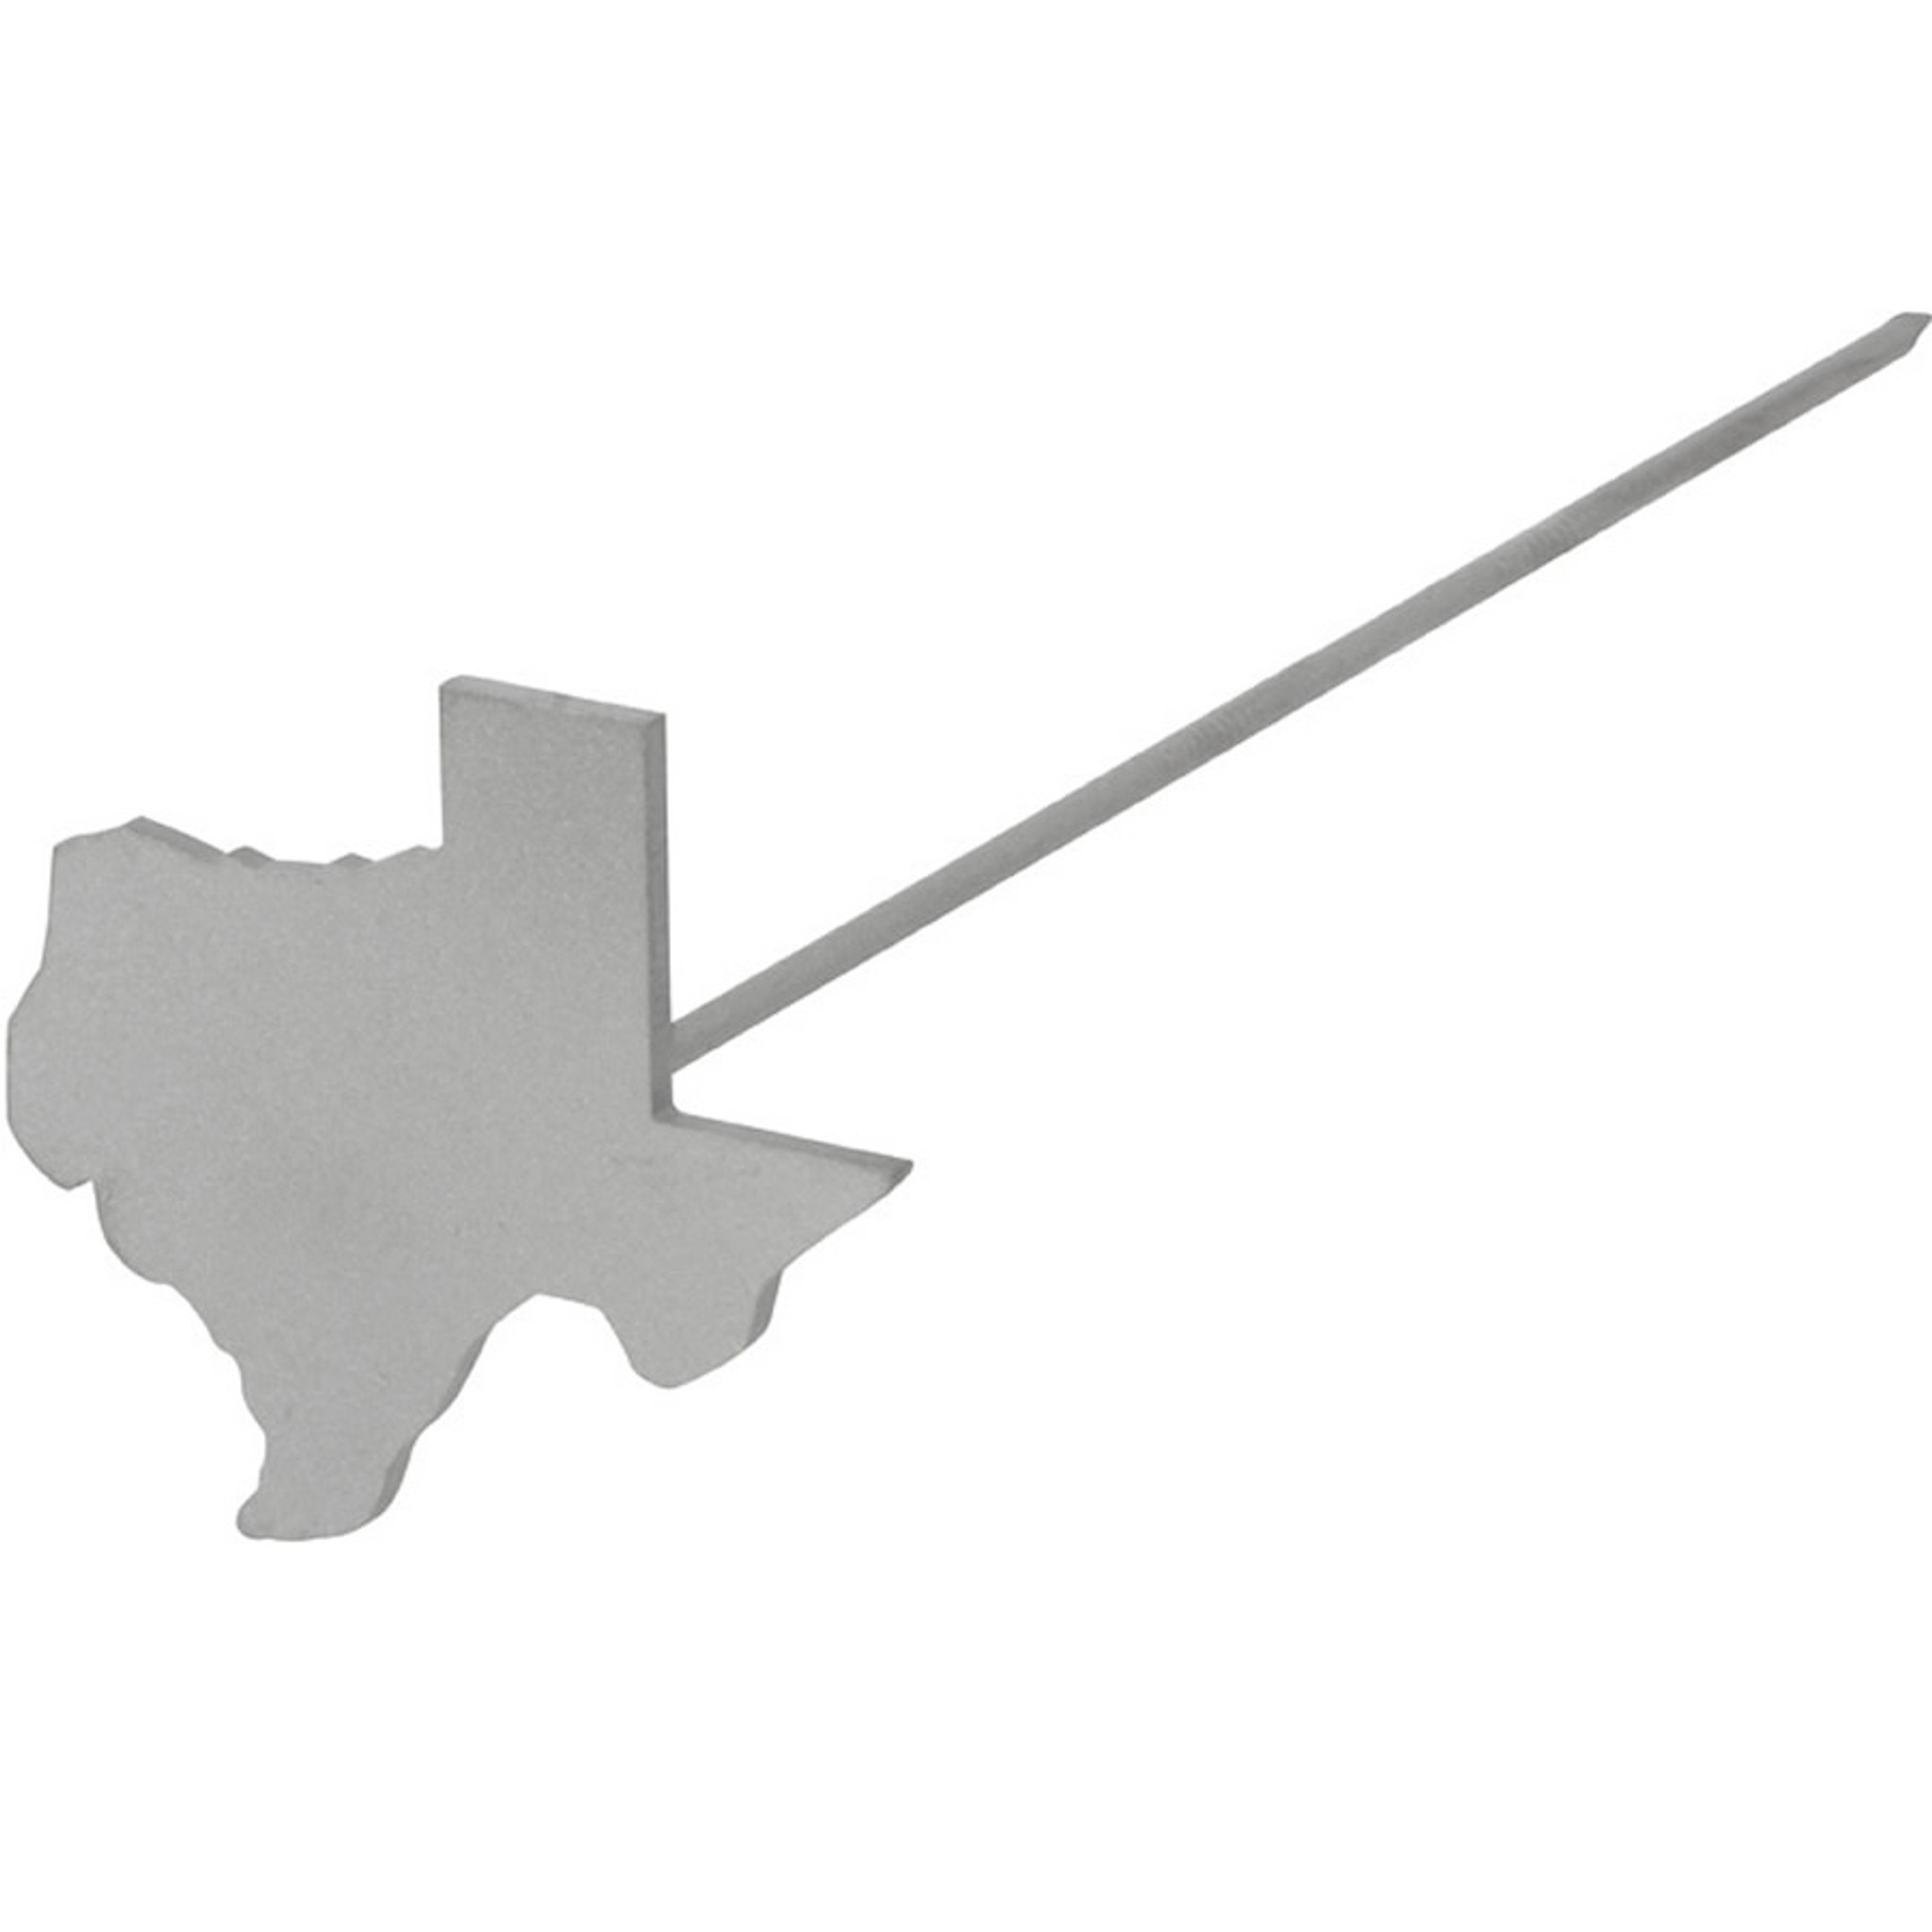 Buy Texas Wood Branding Iron for Personalized Crafts, Custom Woodworking,  BBQ, and Grilling - Texas Longhorn - 4 - The Heritage Forge Online at  desertcartINDIA